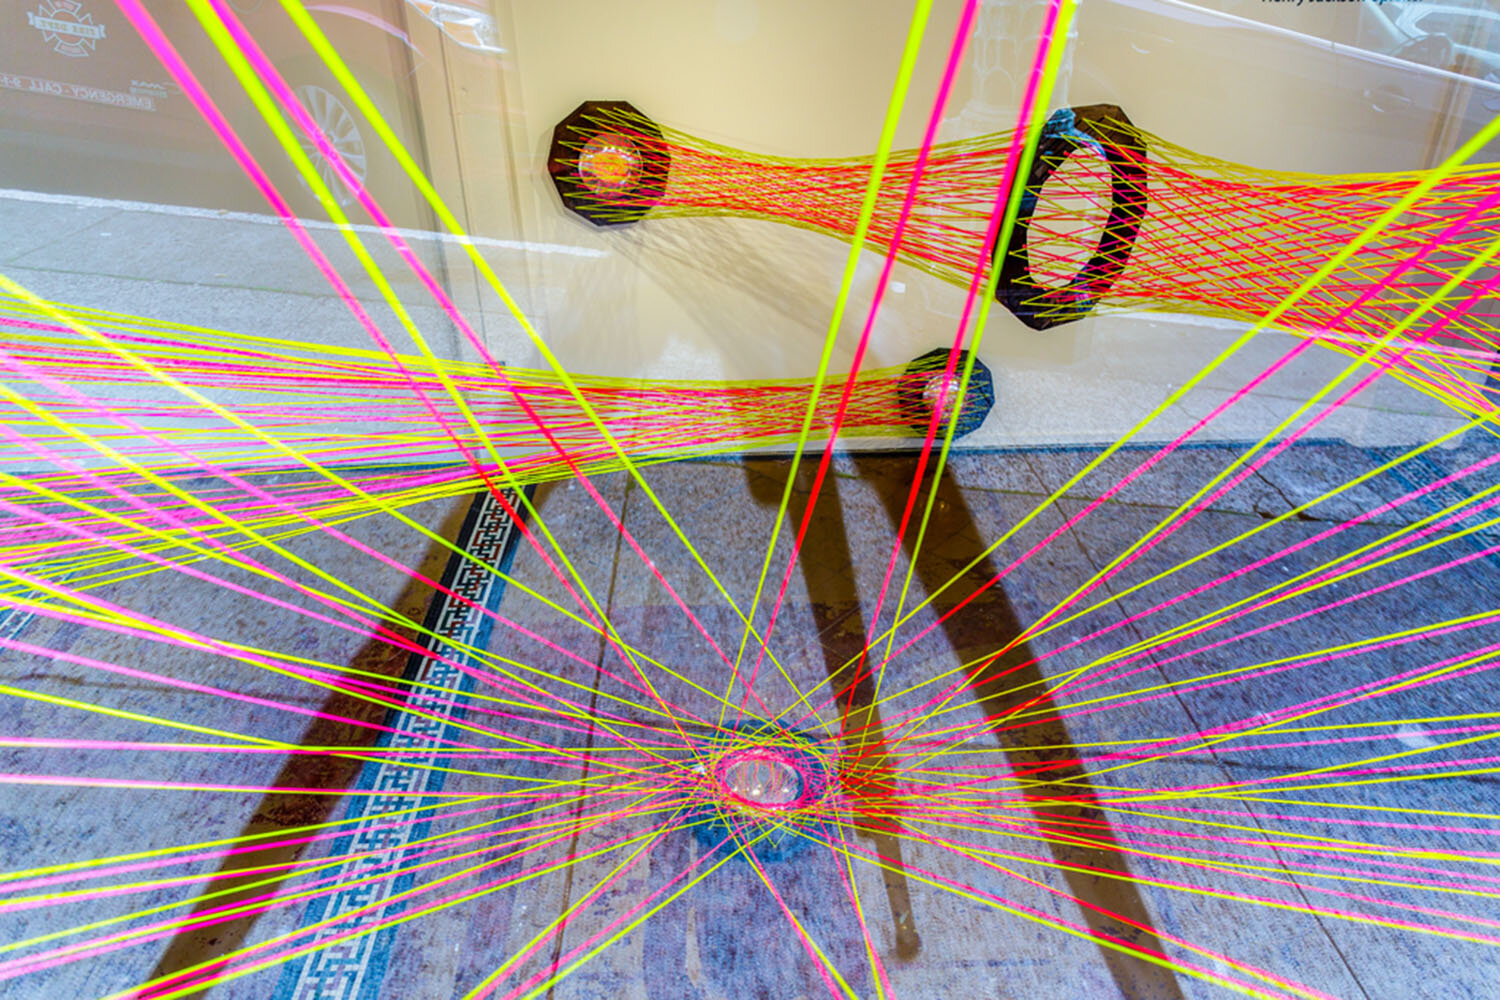   Sight Lines , paracord, blown glass, wood, and copper, installation various sizes, 2019, photo credit Ian Lewis 